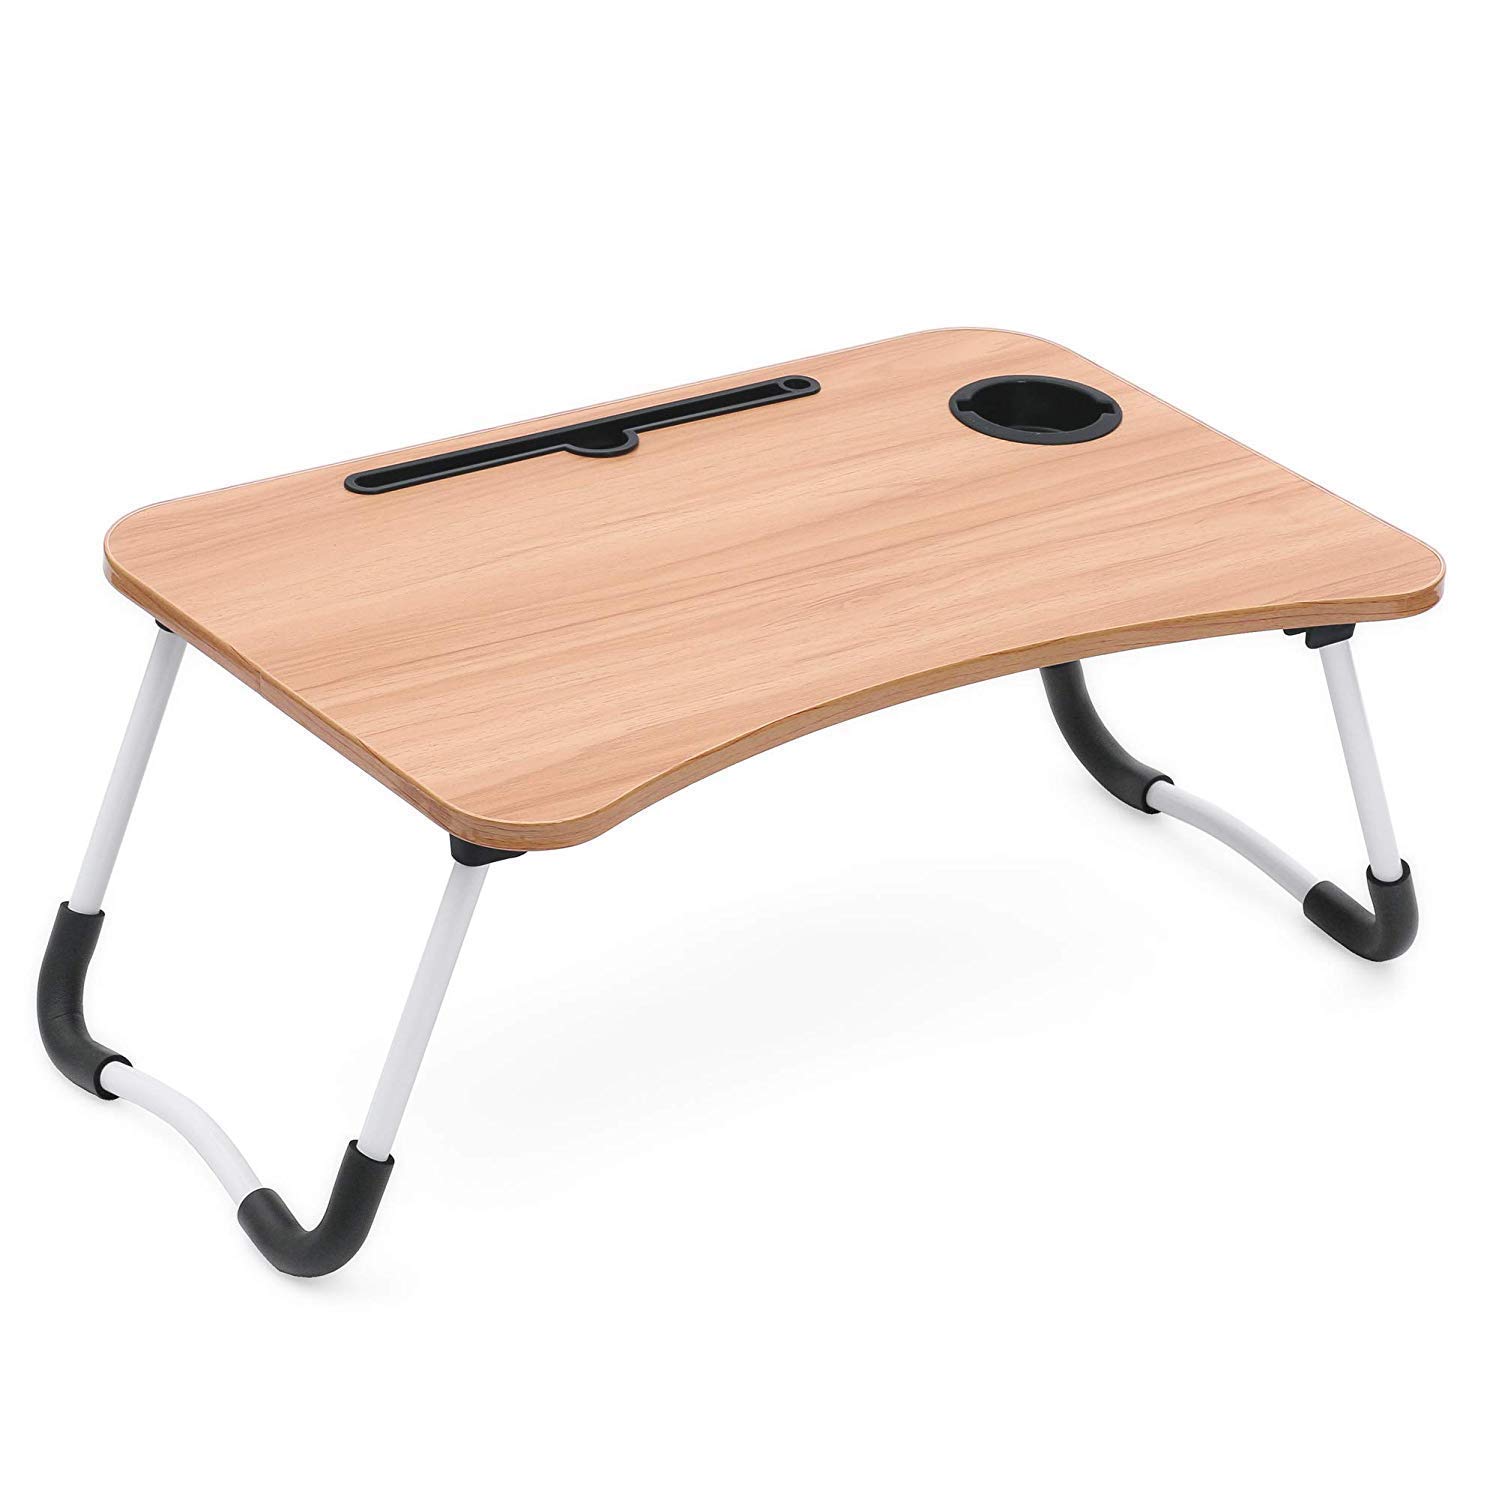 Portable folding laptop and study table